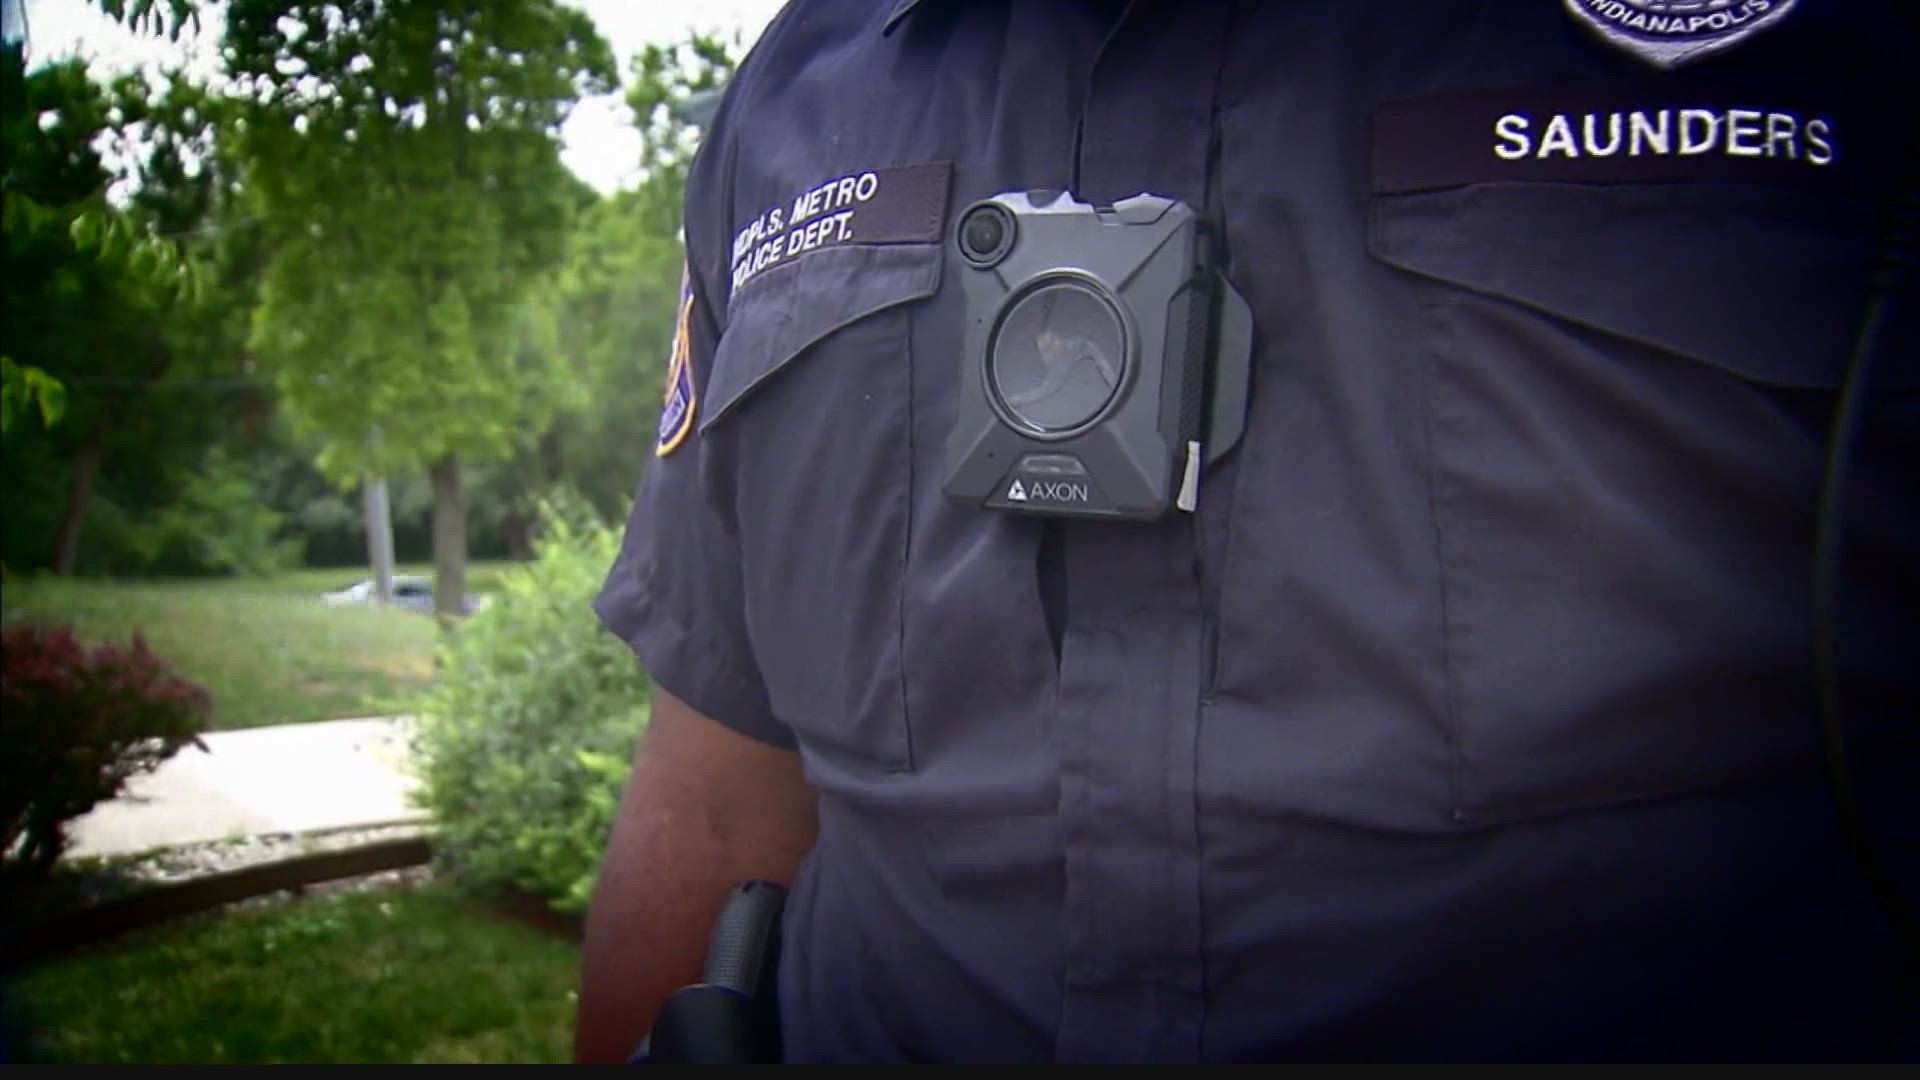 Among other things, the law makes it illegal for an officer to turn off a police body camera in an effort to cover up a crime.